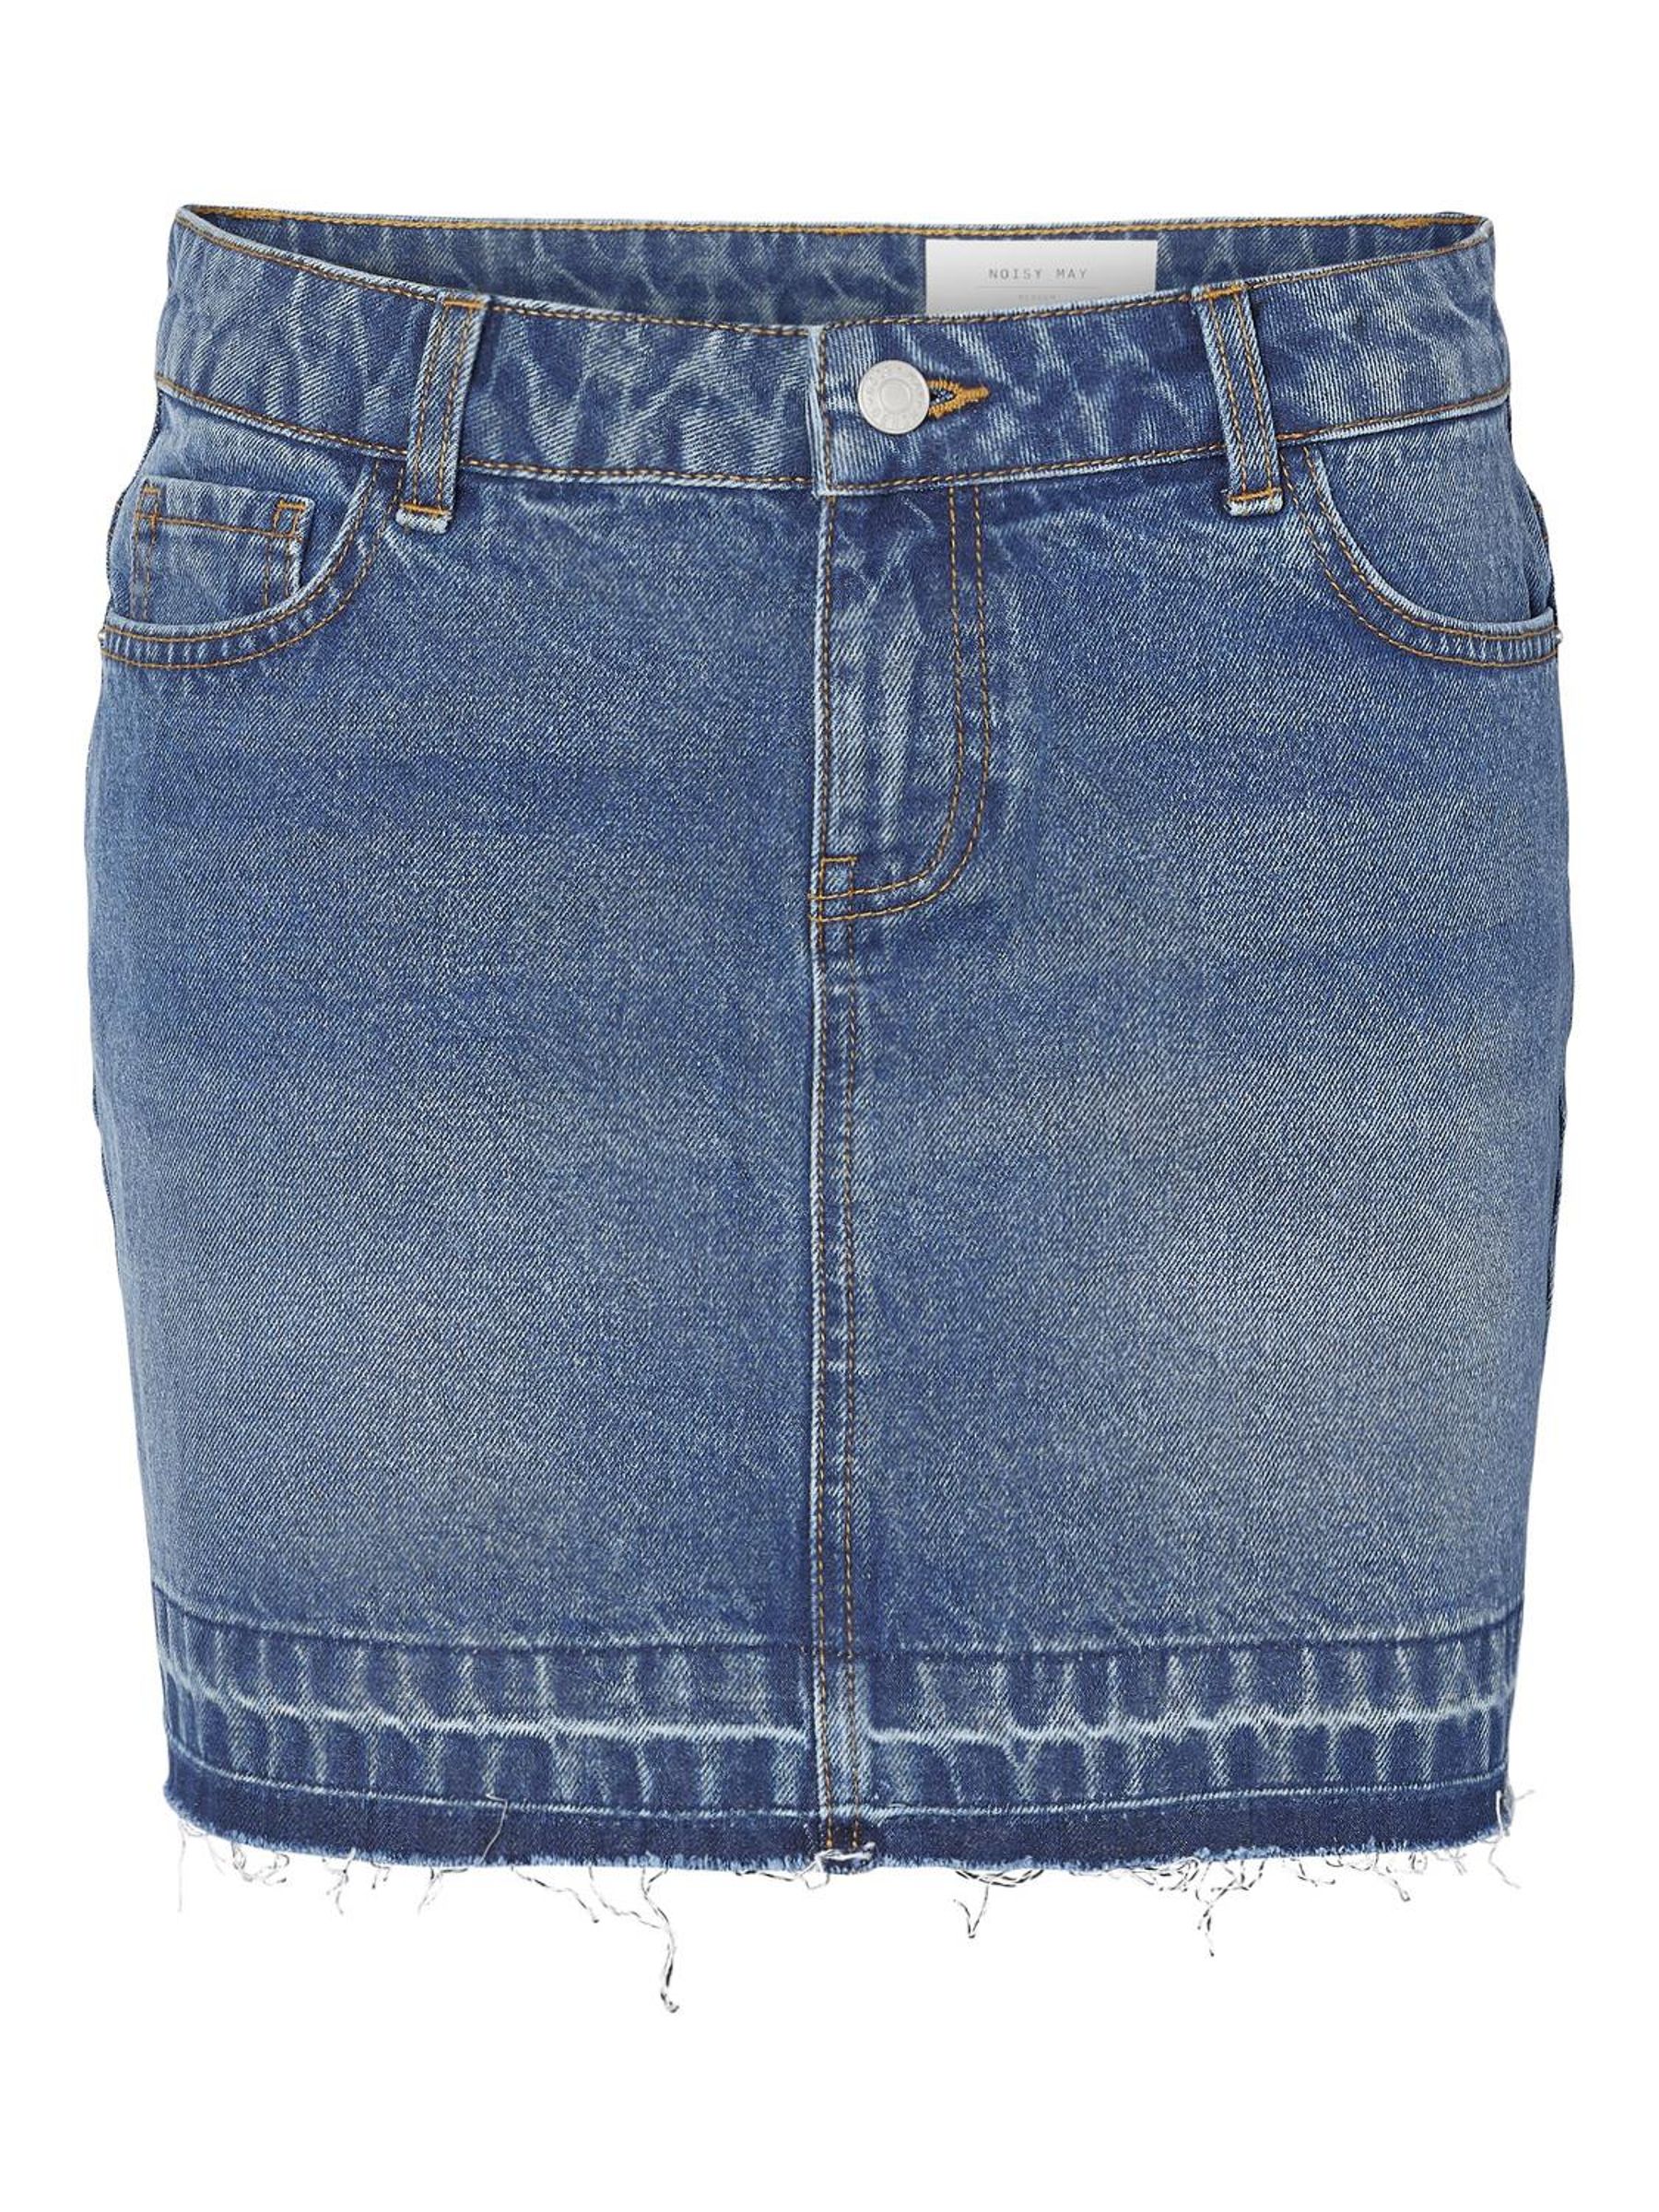 Save 10% In Rewards When You Purchase These 5 Stylish Denim Skirts